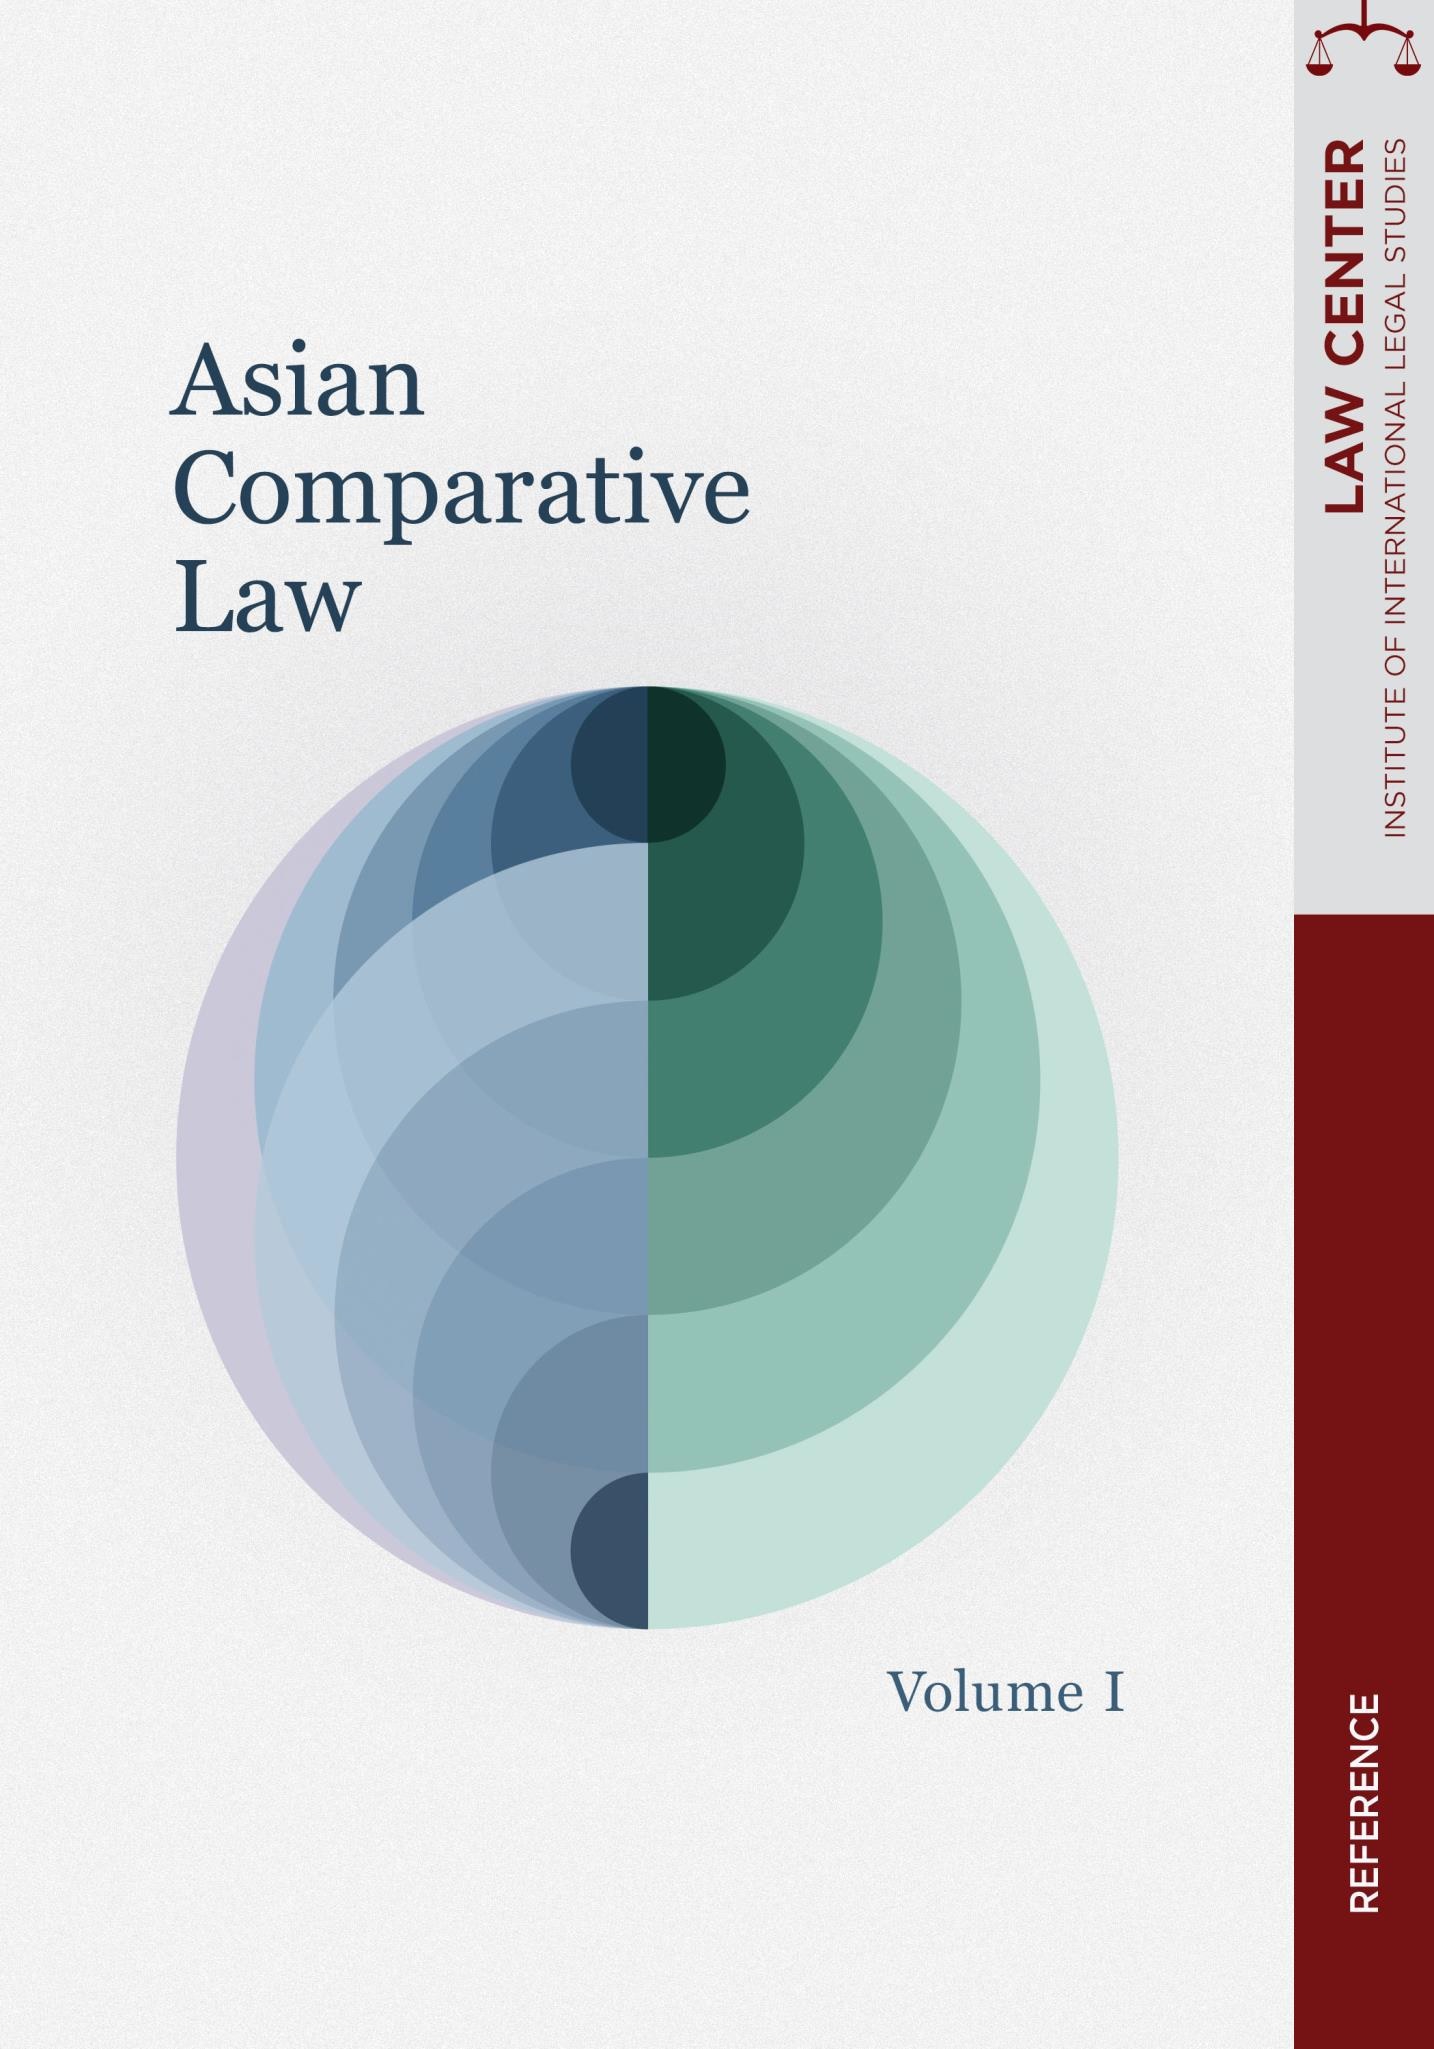 Asian Comparative Law Project Virtual Book Launch